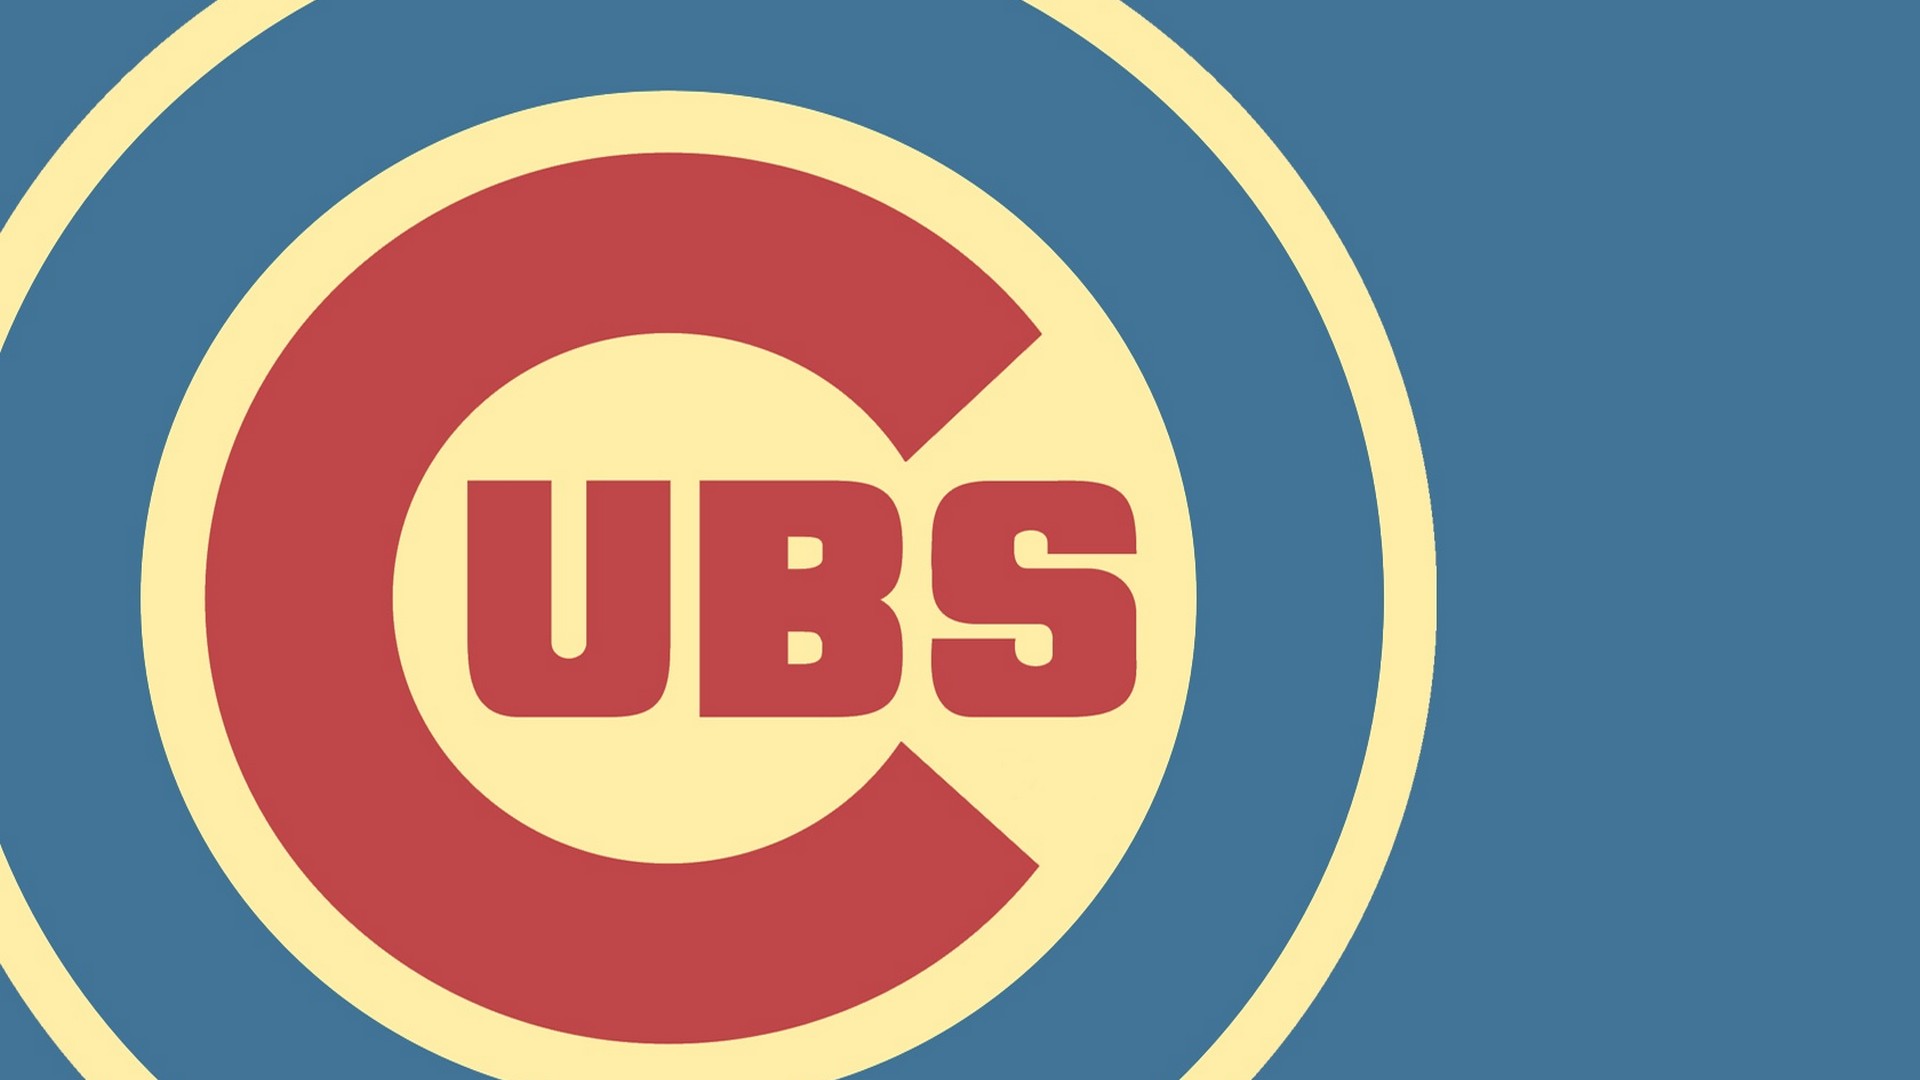 HD Backgrounds Chicago Cubs With high-resolution 1920X1080 pixel. You can use this wallpaper for Mac Desktop Wallpaper, Laptop Screensavers, Android Wallpapers, Tablet or iPhone Home Screen and another mobile phone device